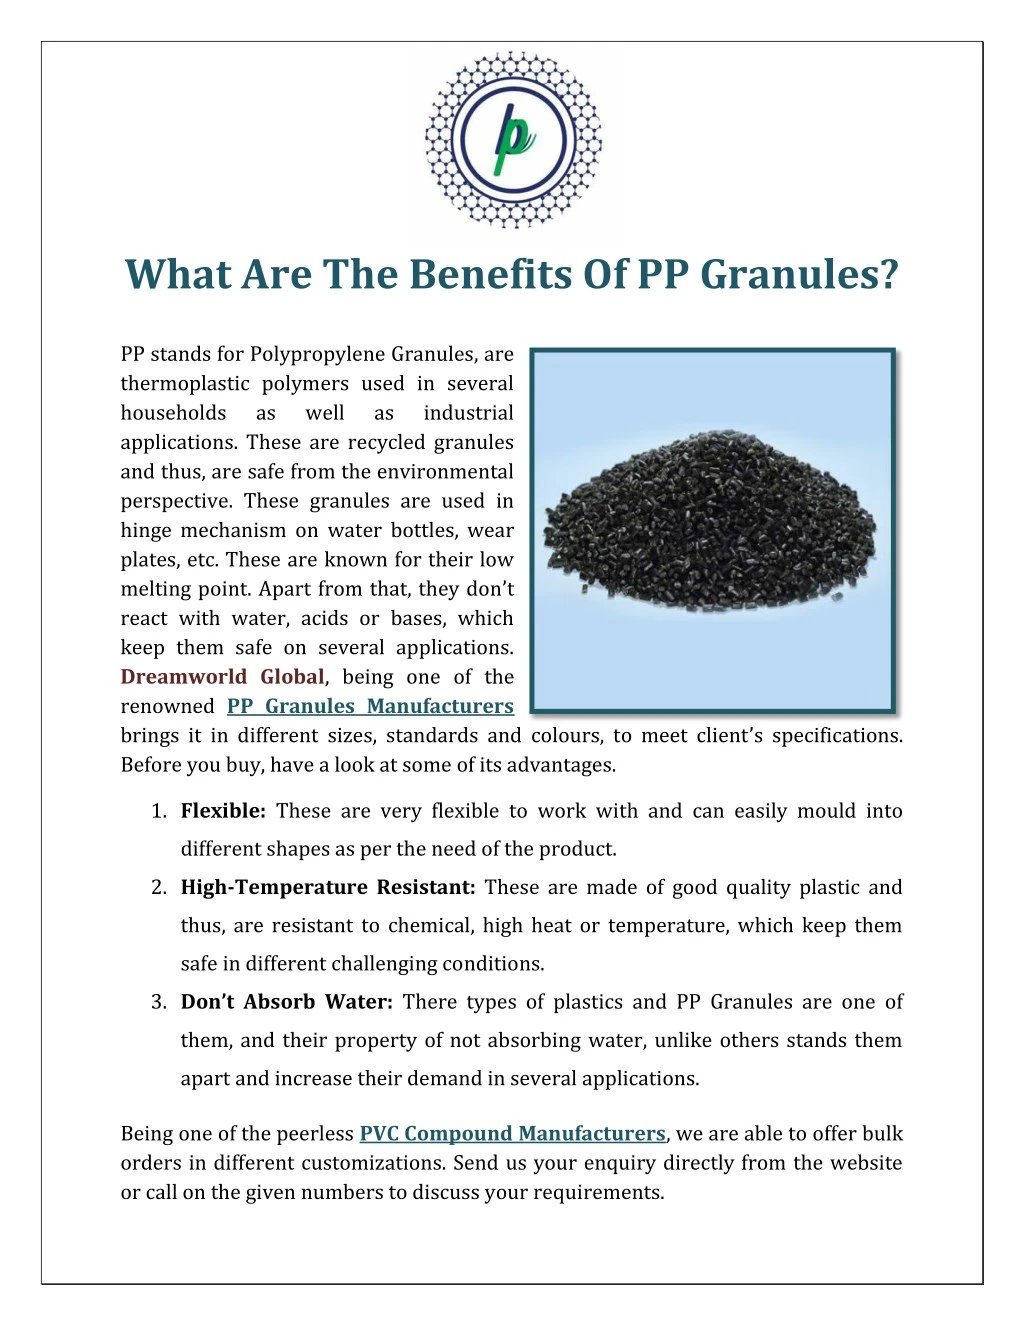 what are the benefits of pp granules